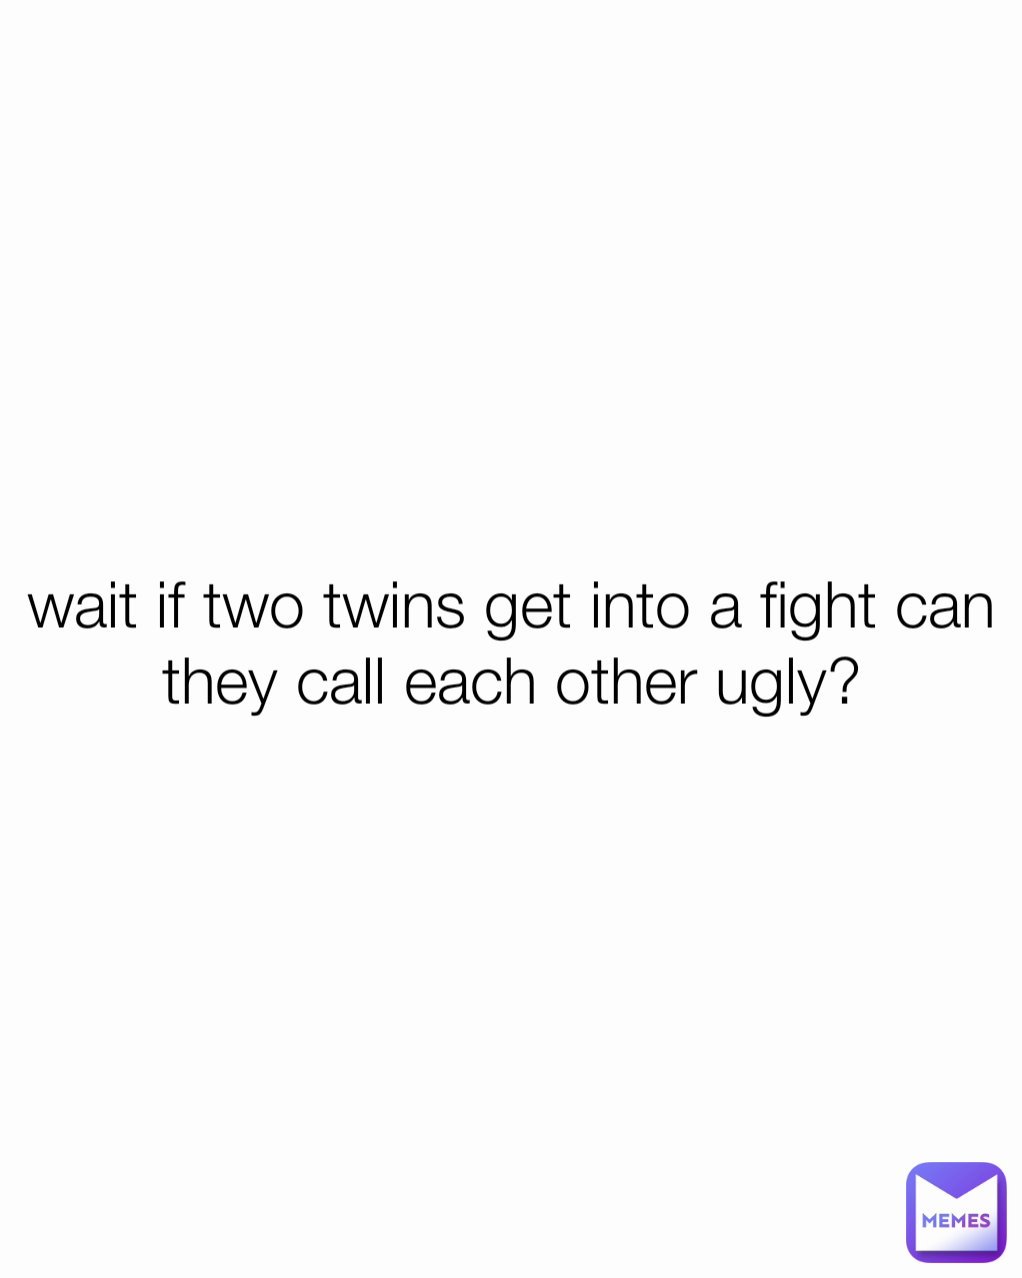 wait if two twins get into a fight can they call each other ugly?